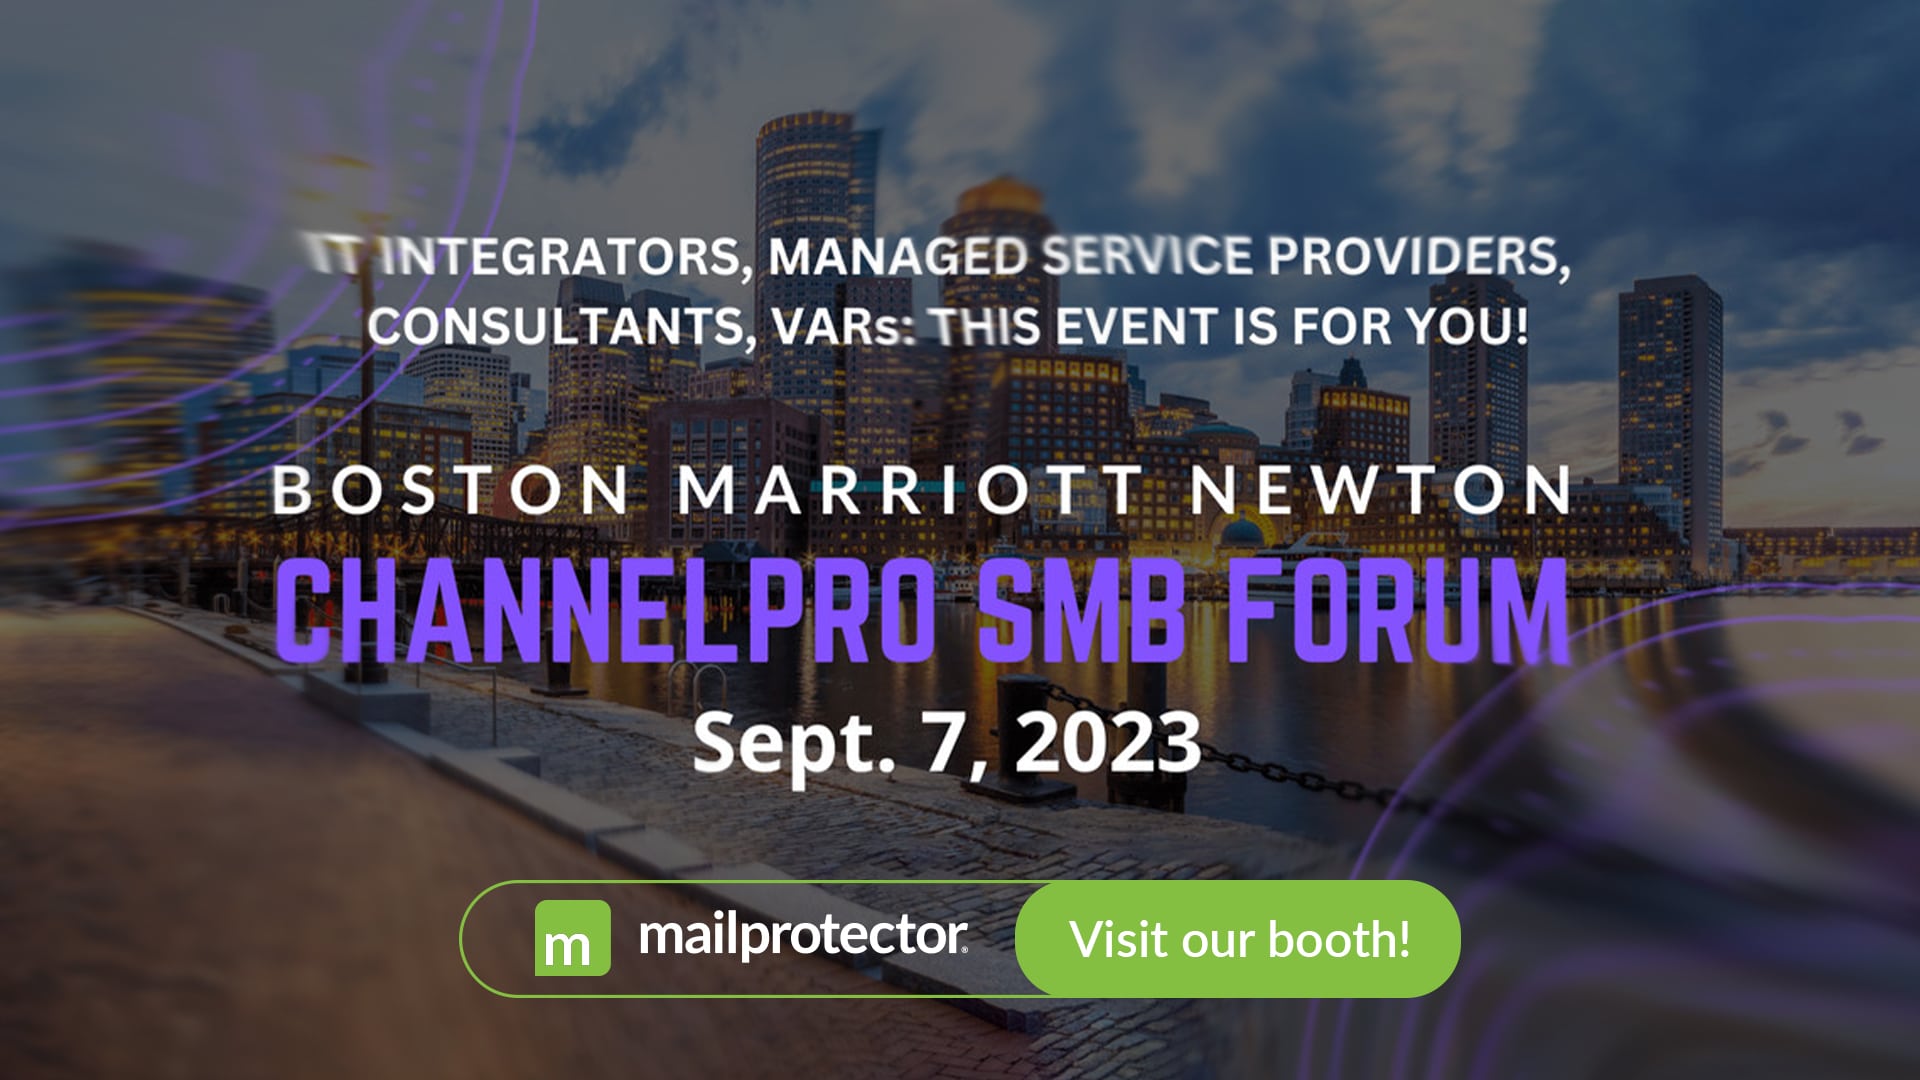 ChannelPro SMB Forum Boston MA Mailprotector Email Security Vendor 2023